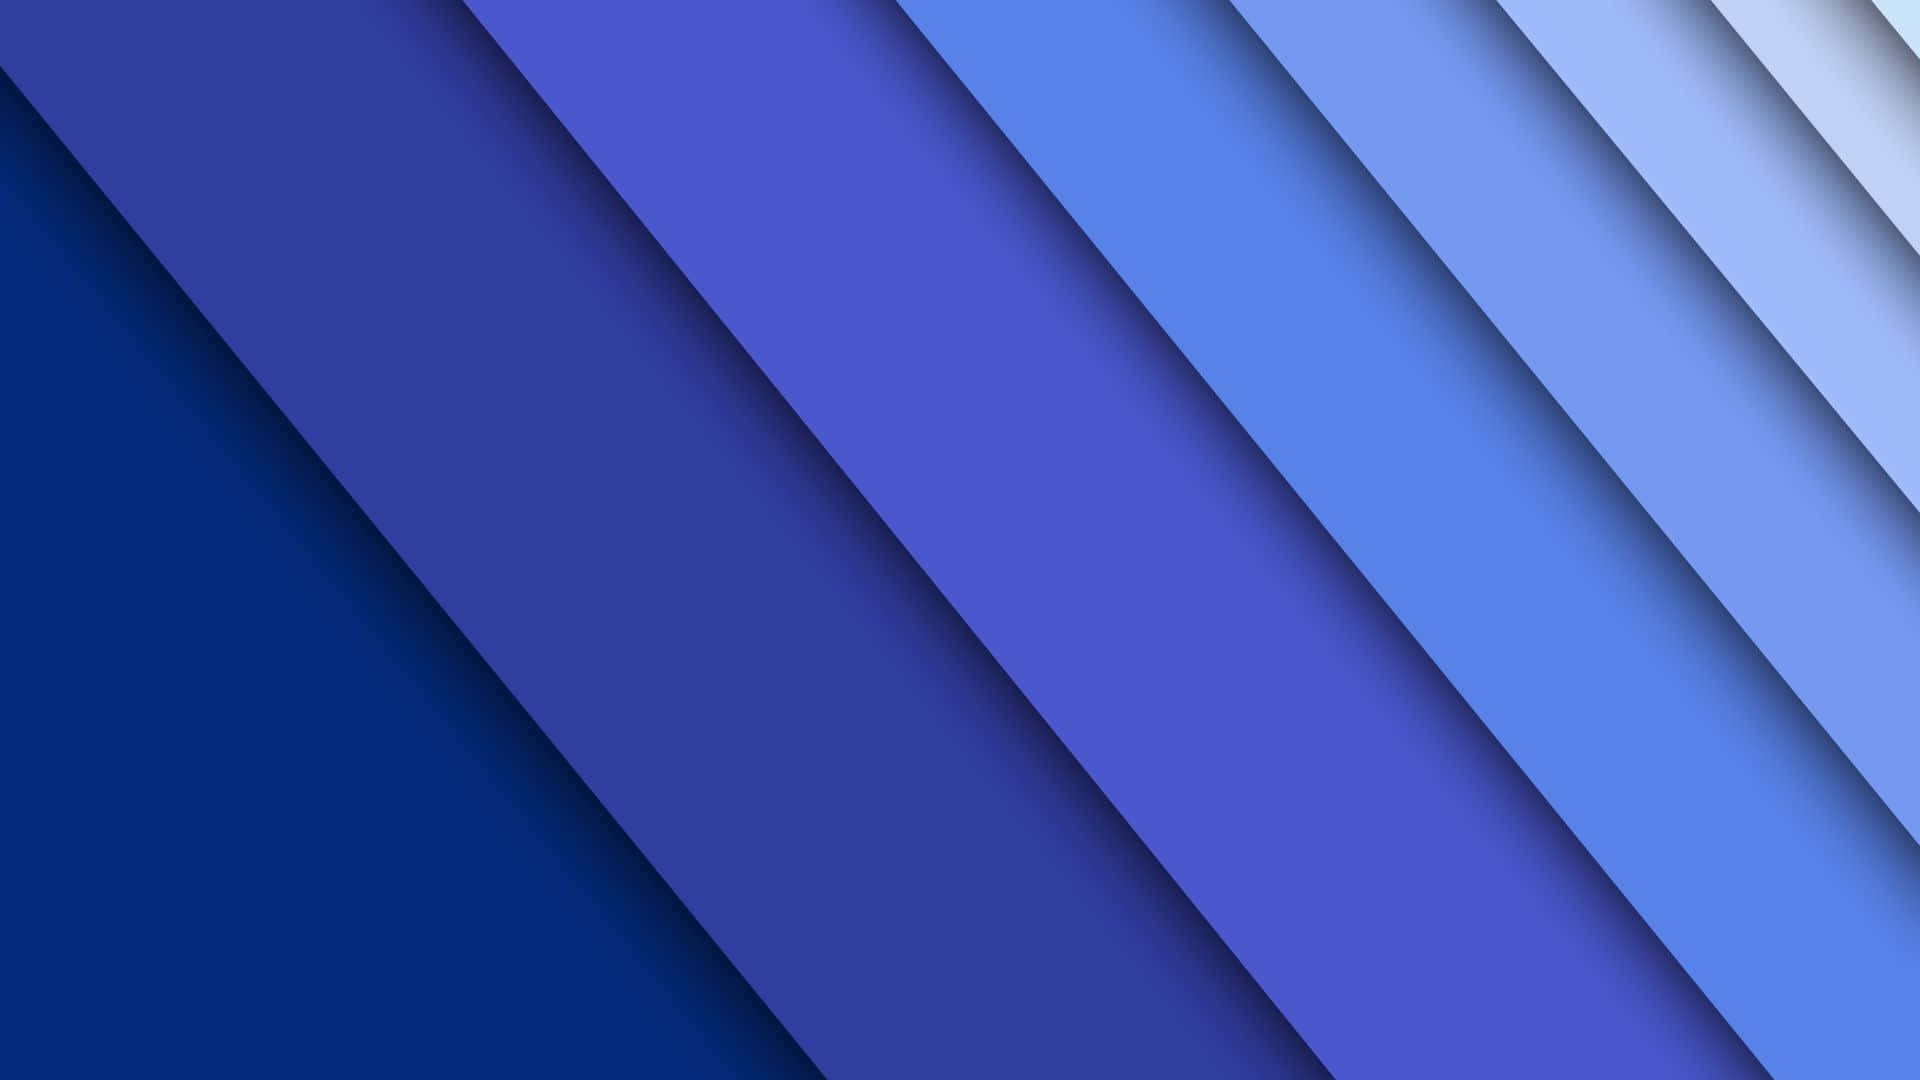 Enjoy the beauty of Material Design with a captivating background.